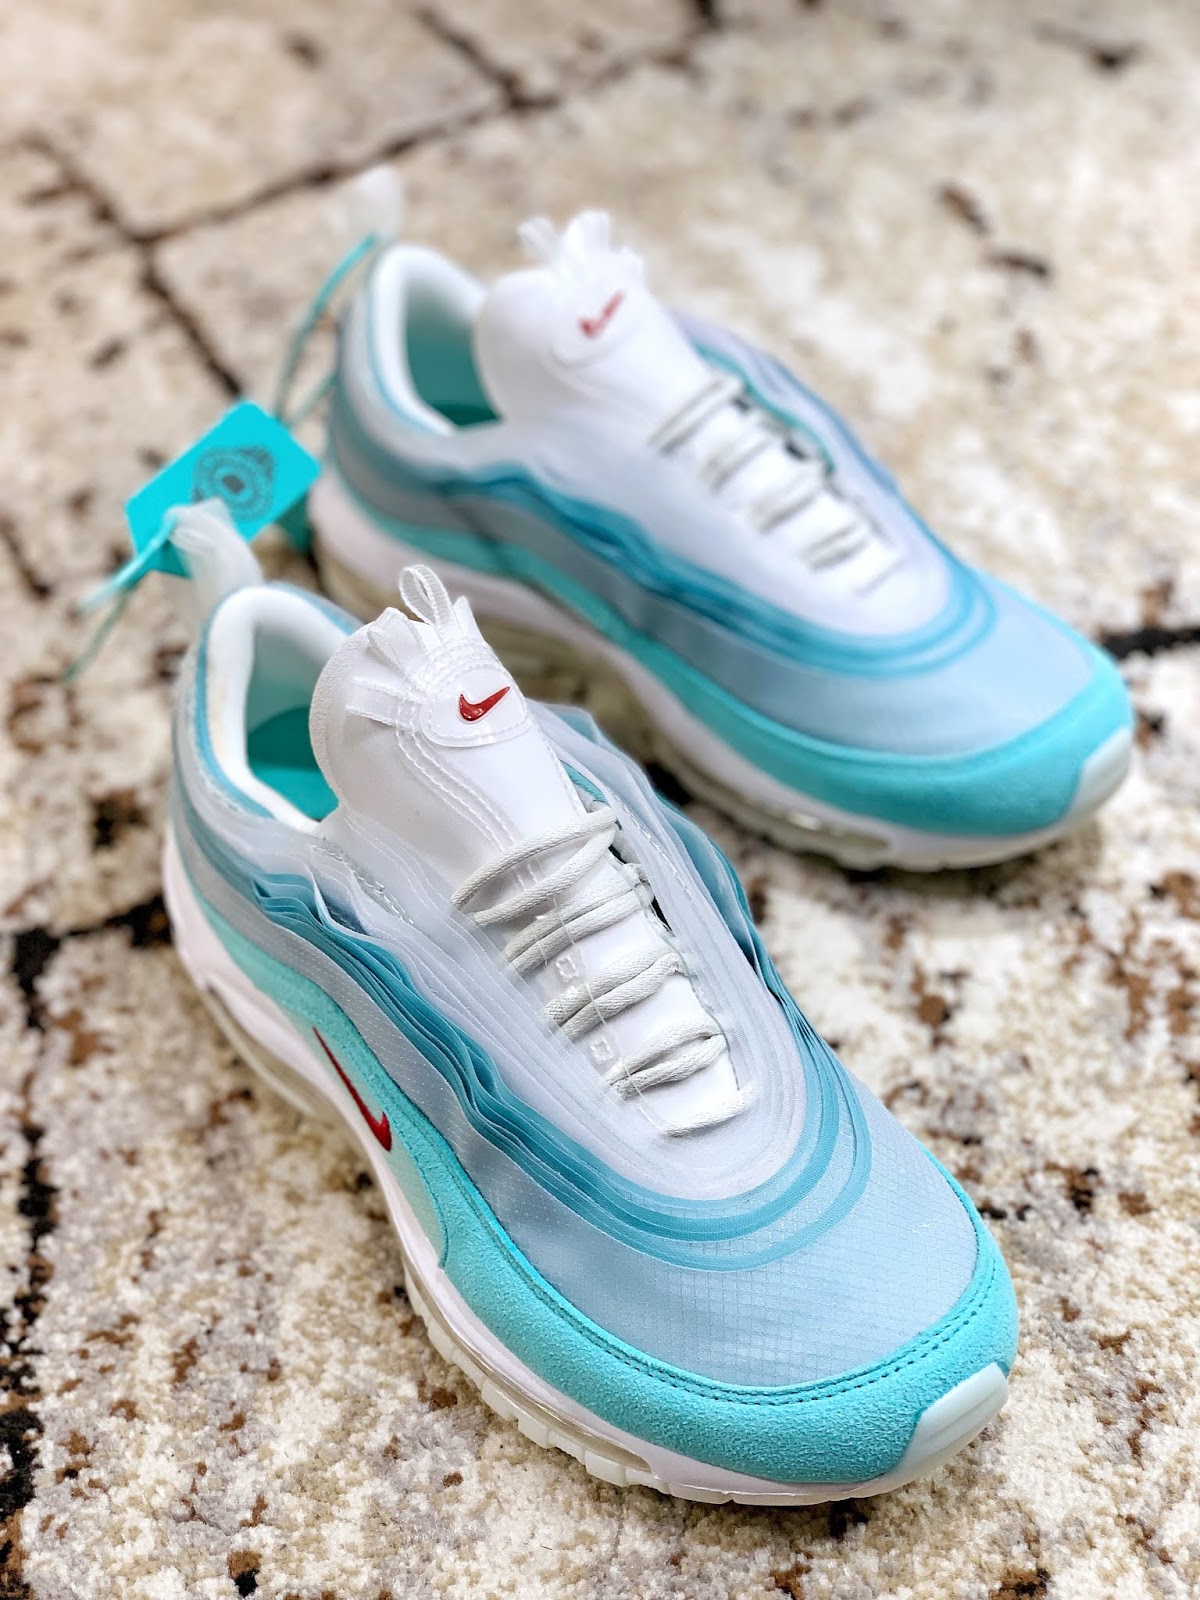 nike air max 97 sneakers featuring water